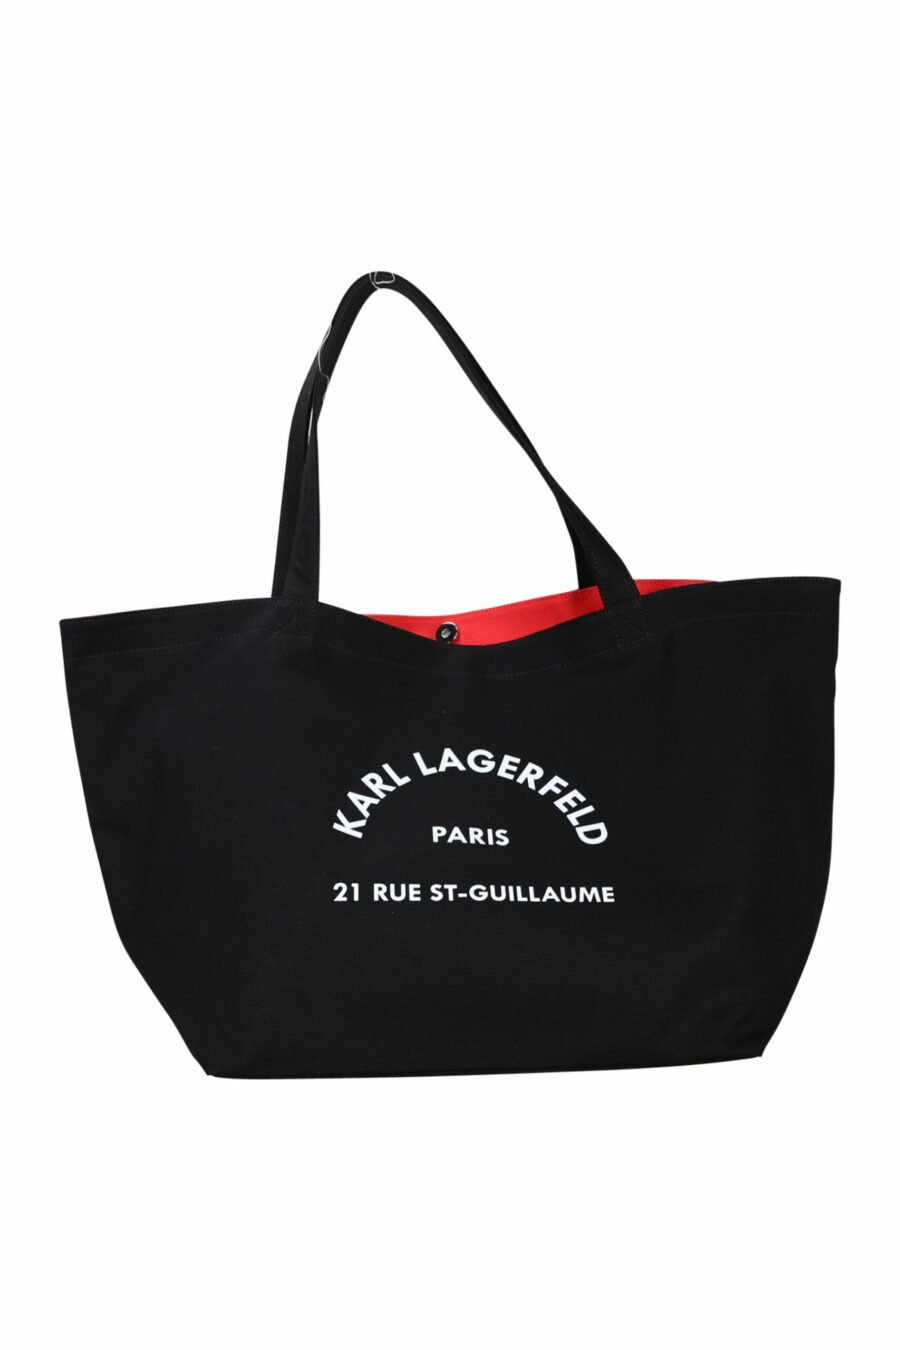 Black tote bag with maxilogo "rue st guillaume" - 8720092106603 scaled